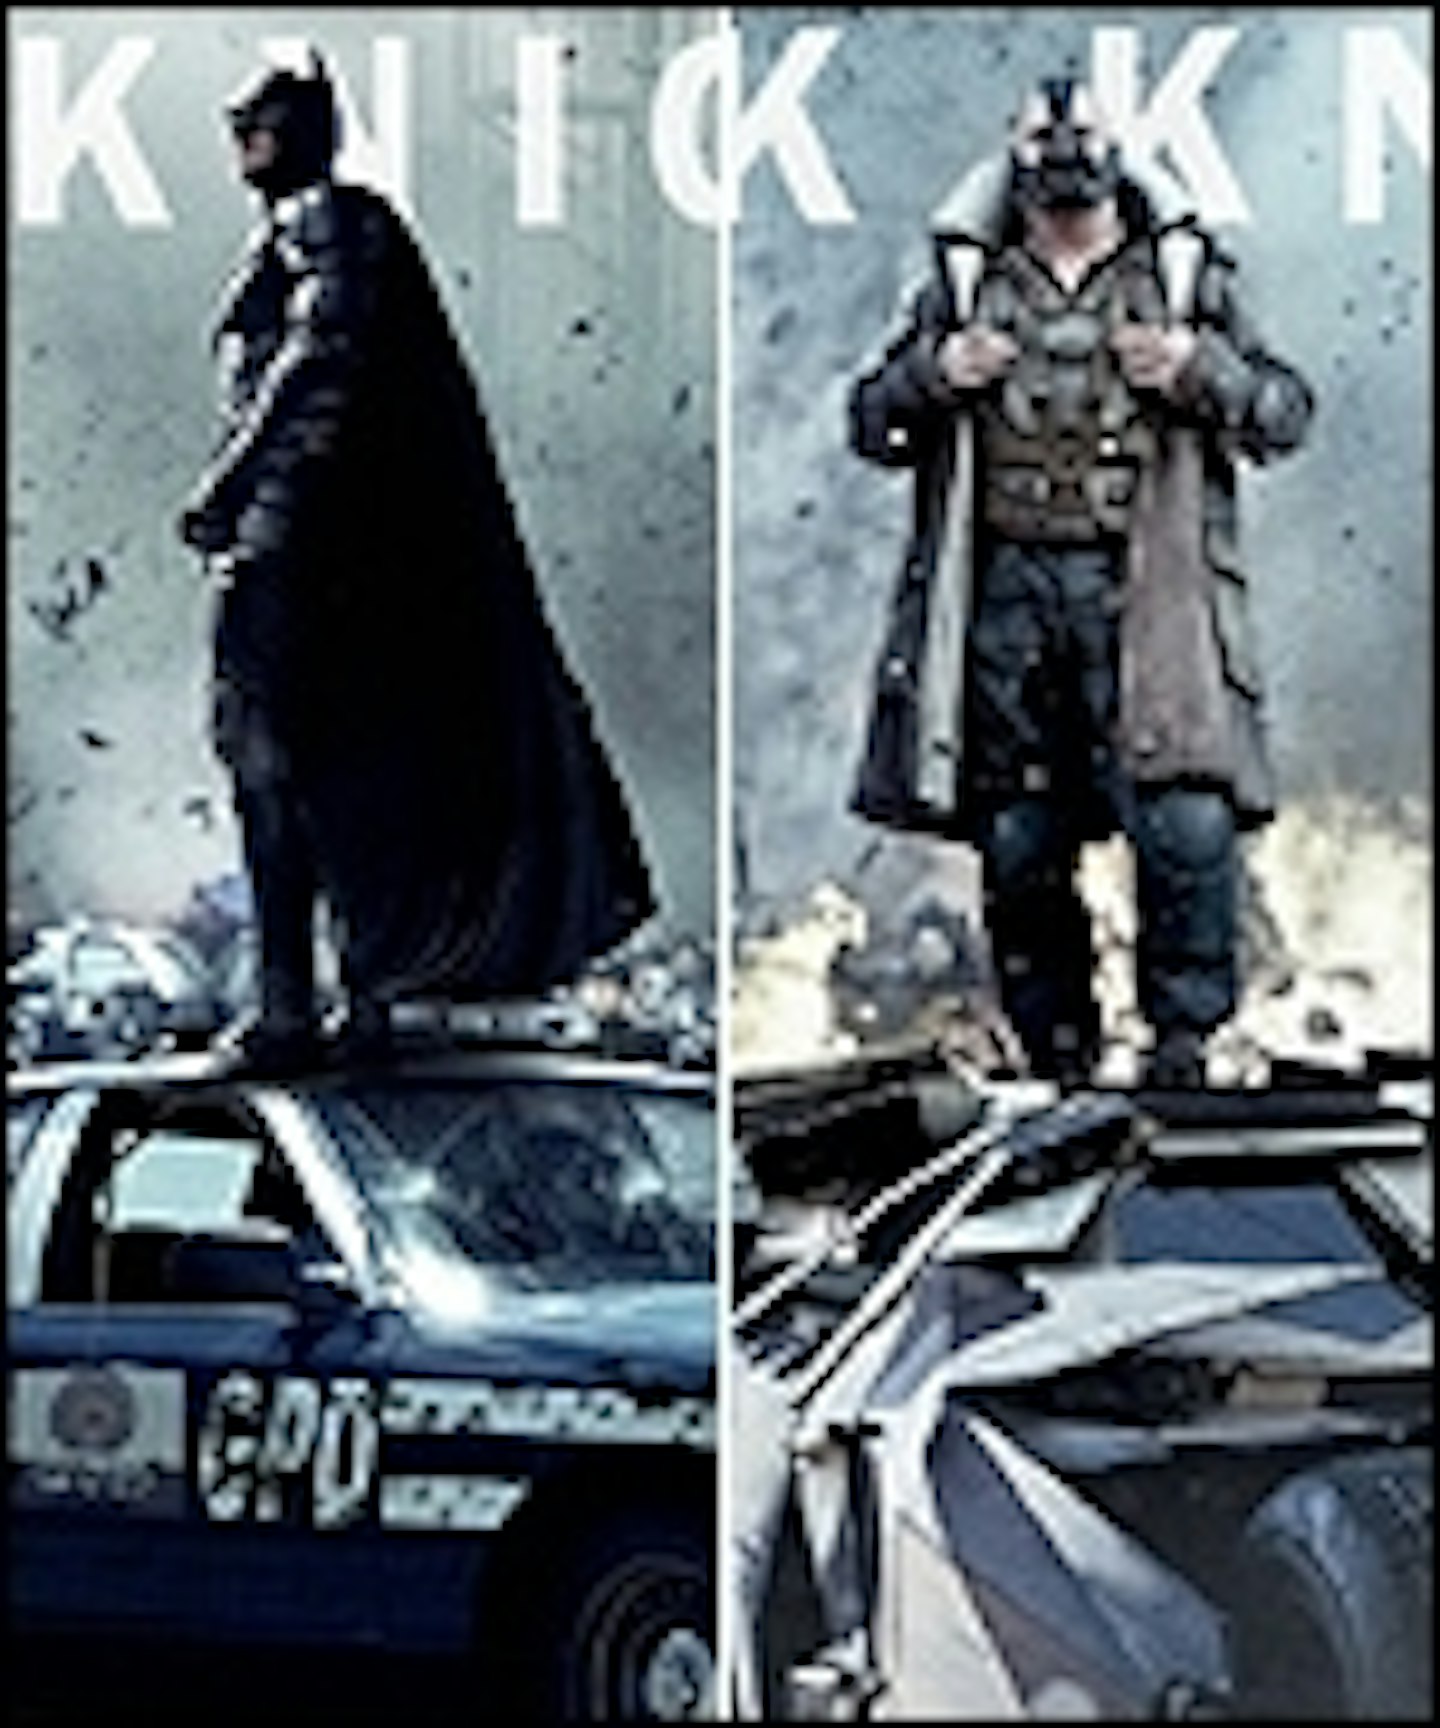 Four New Dark Knight Rises Banners